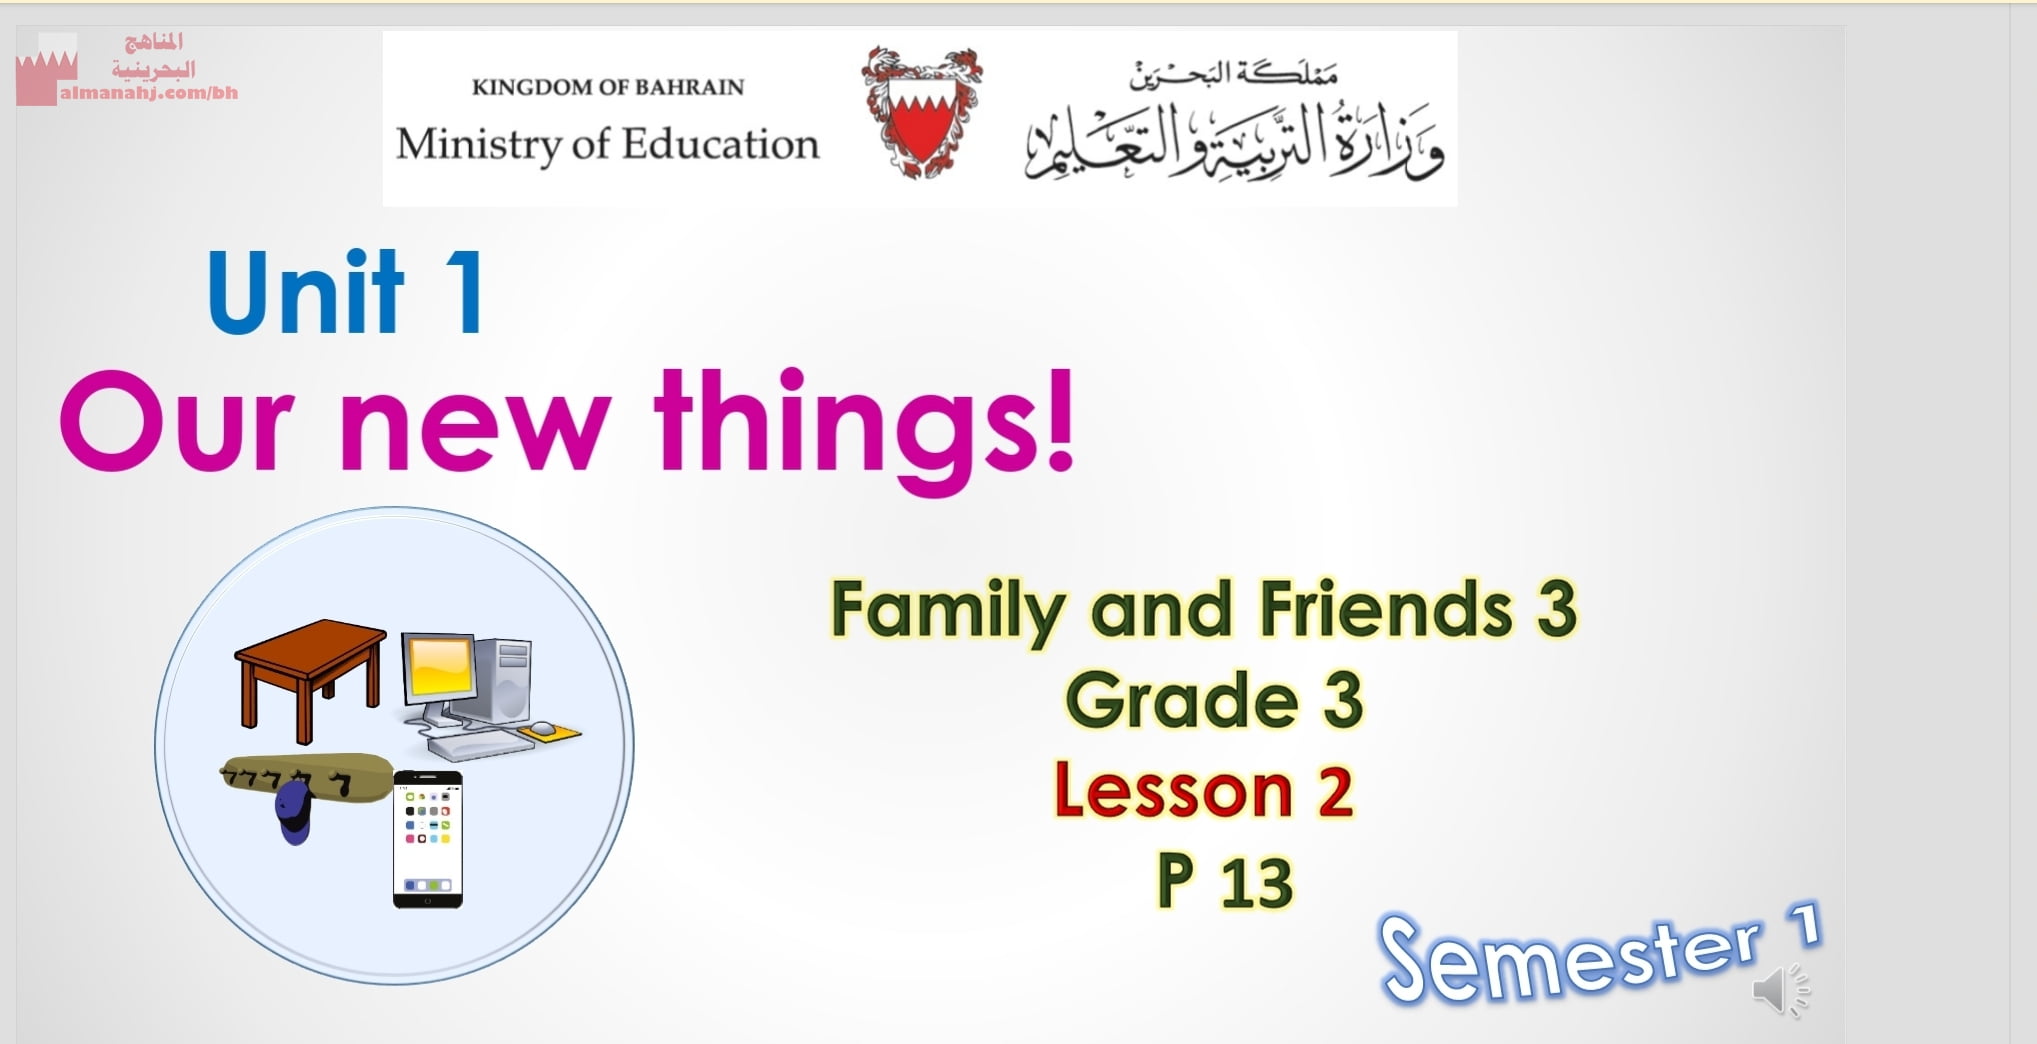 Our new things family and friends lesson 2 PowerPoint presentation